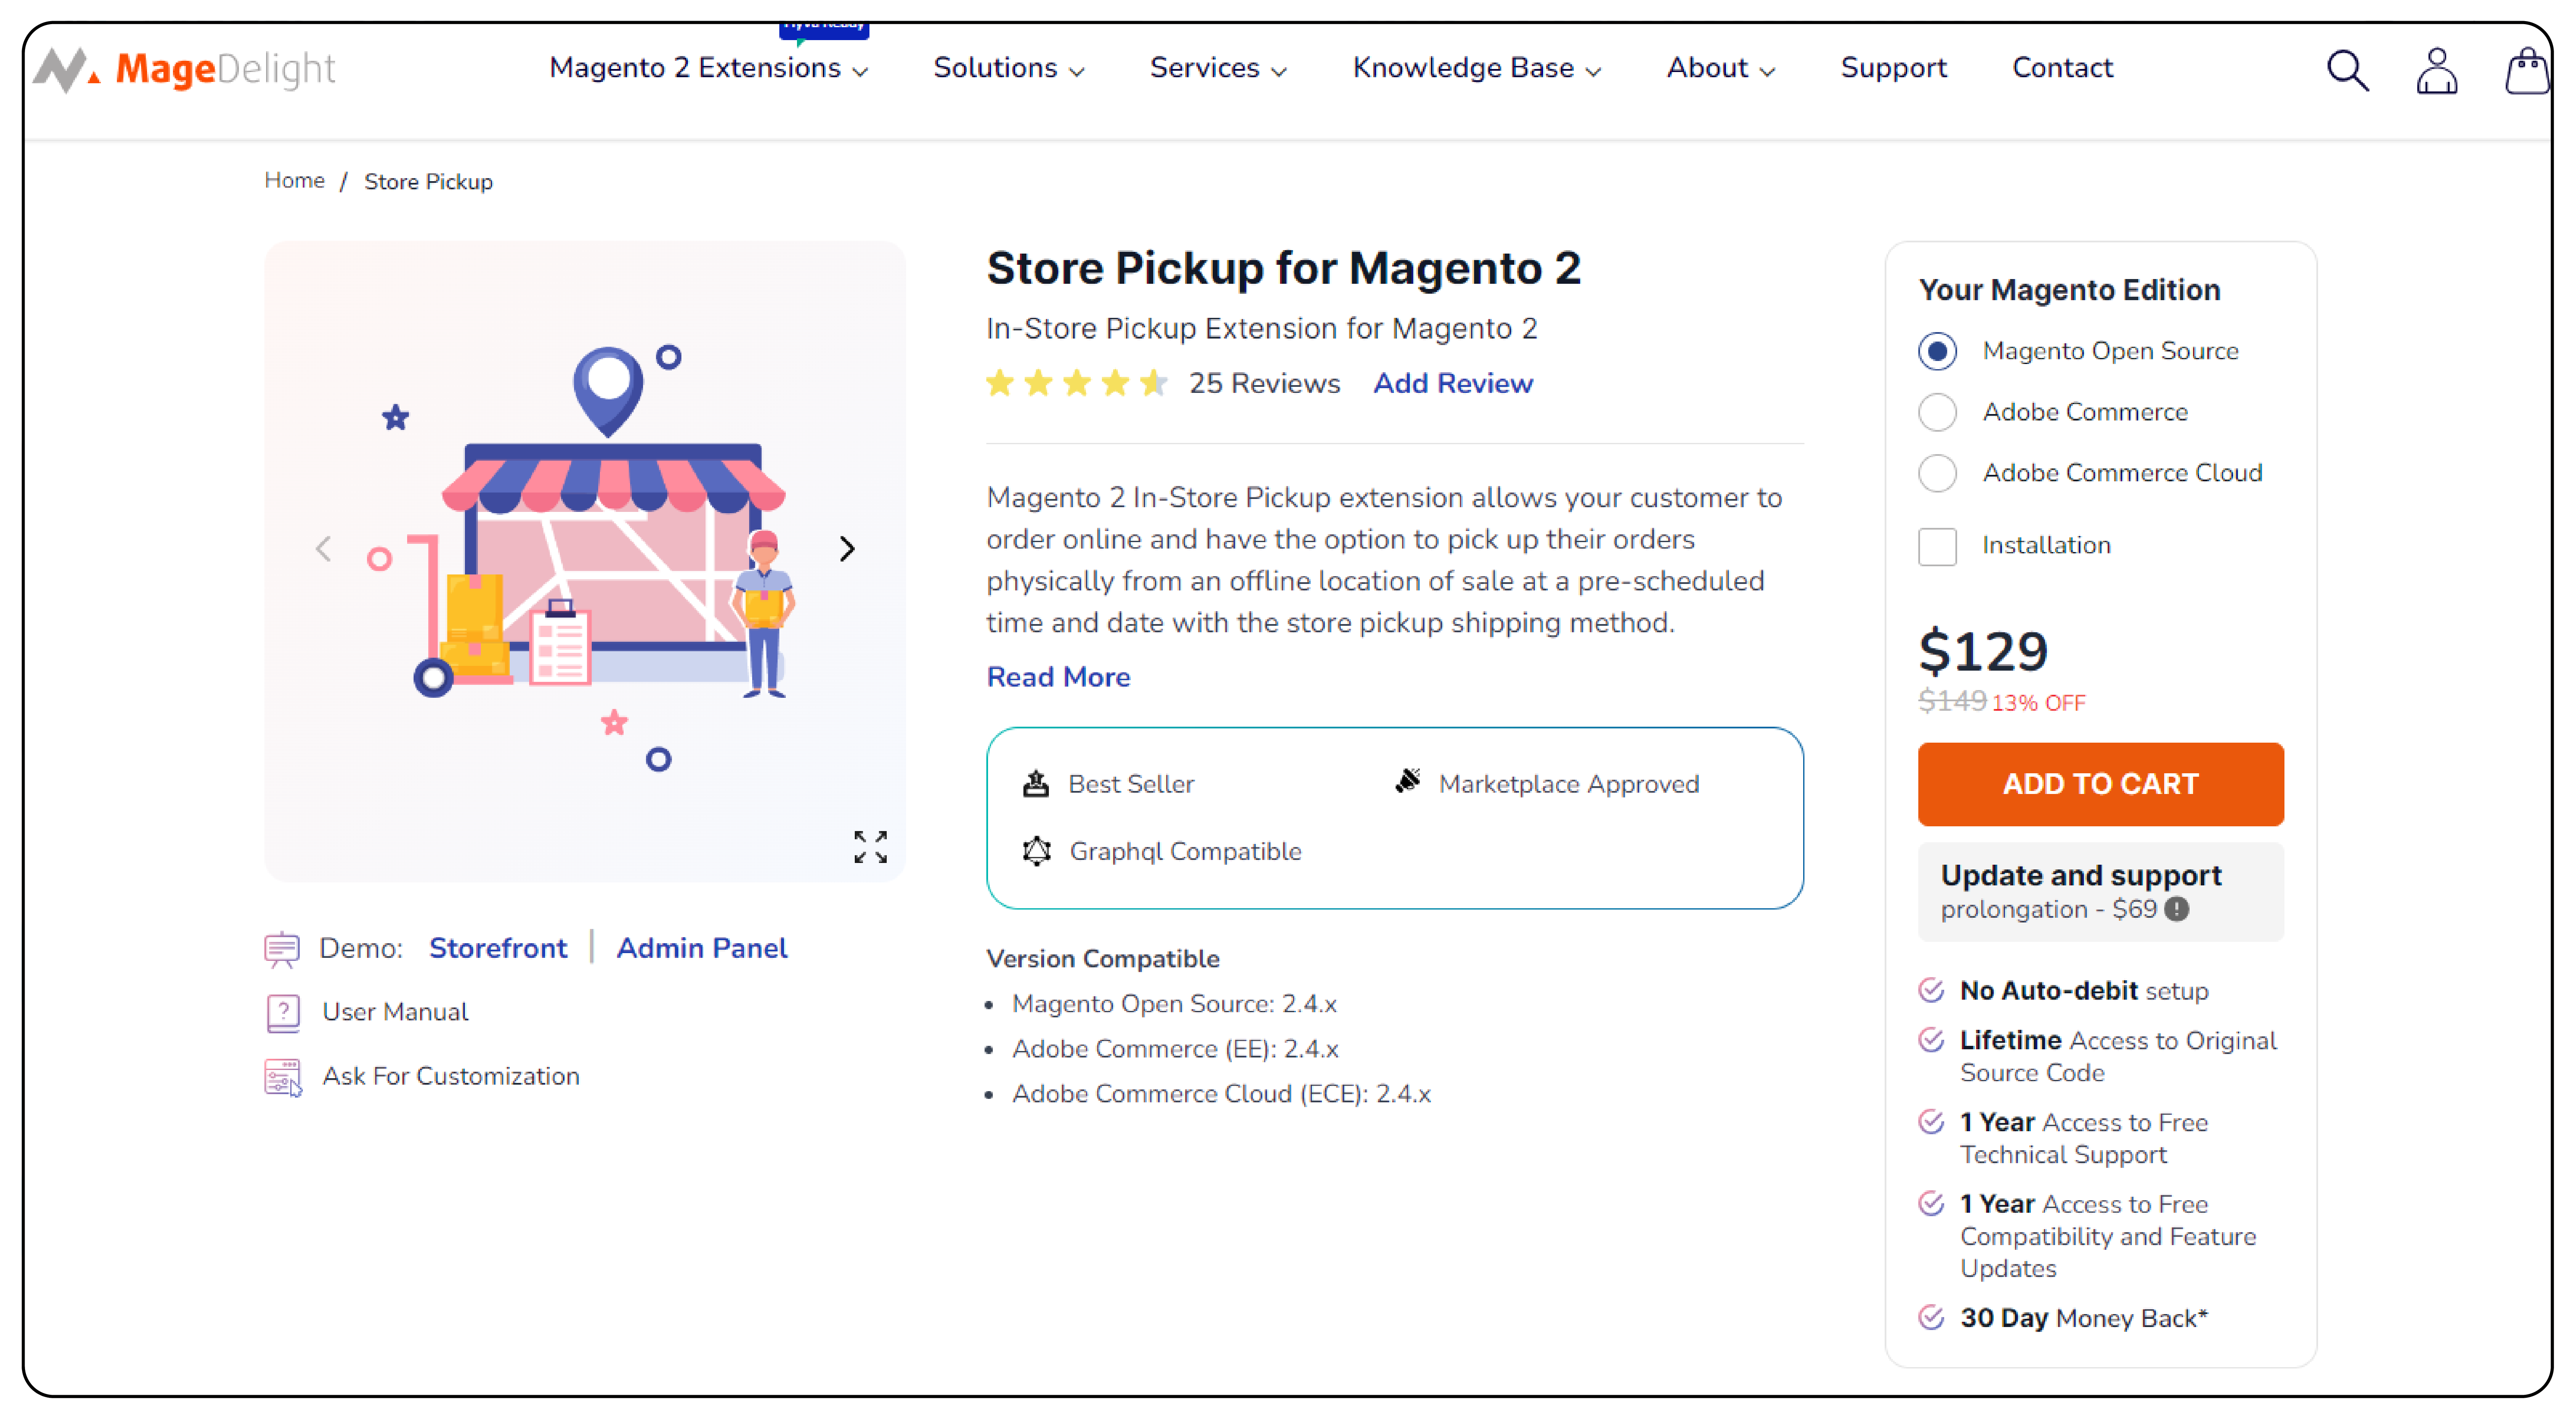 Store Pickup for Magento 2 - MageDelight